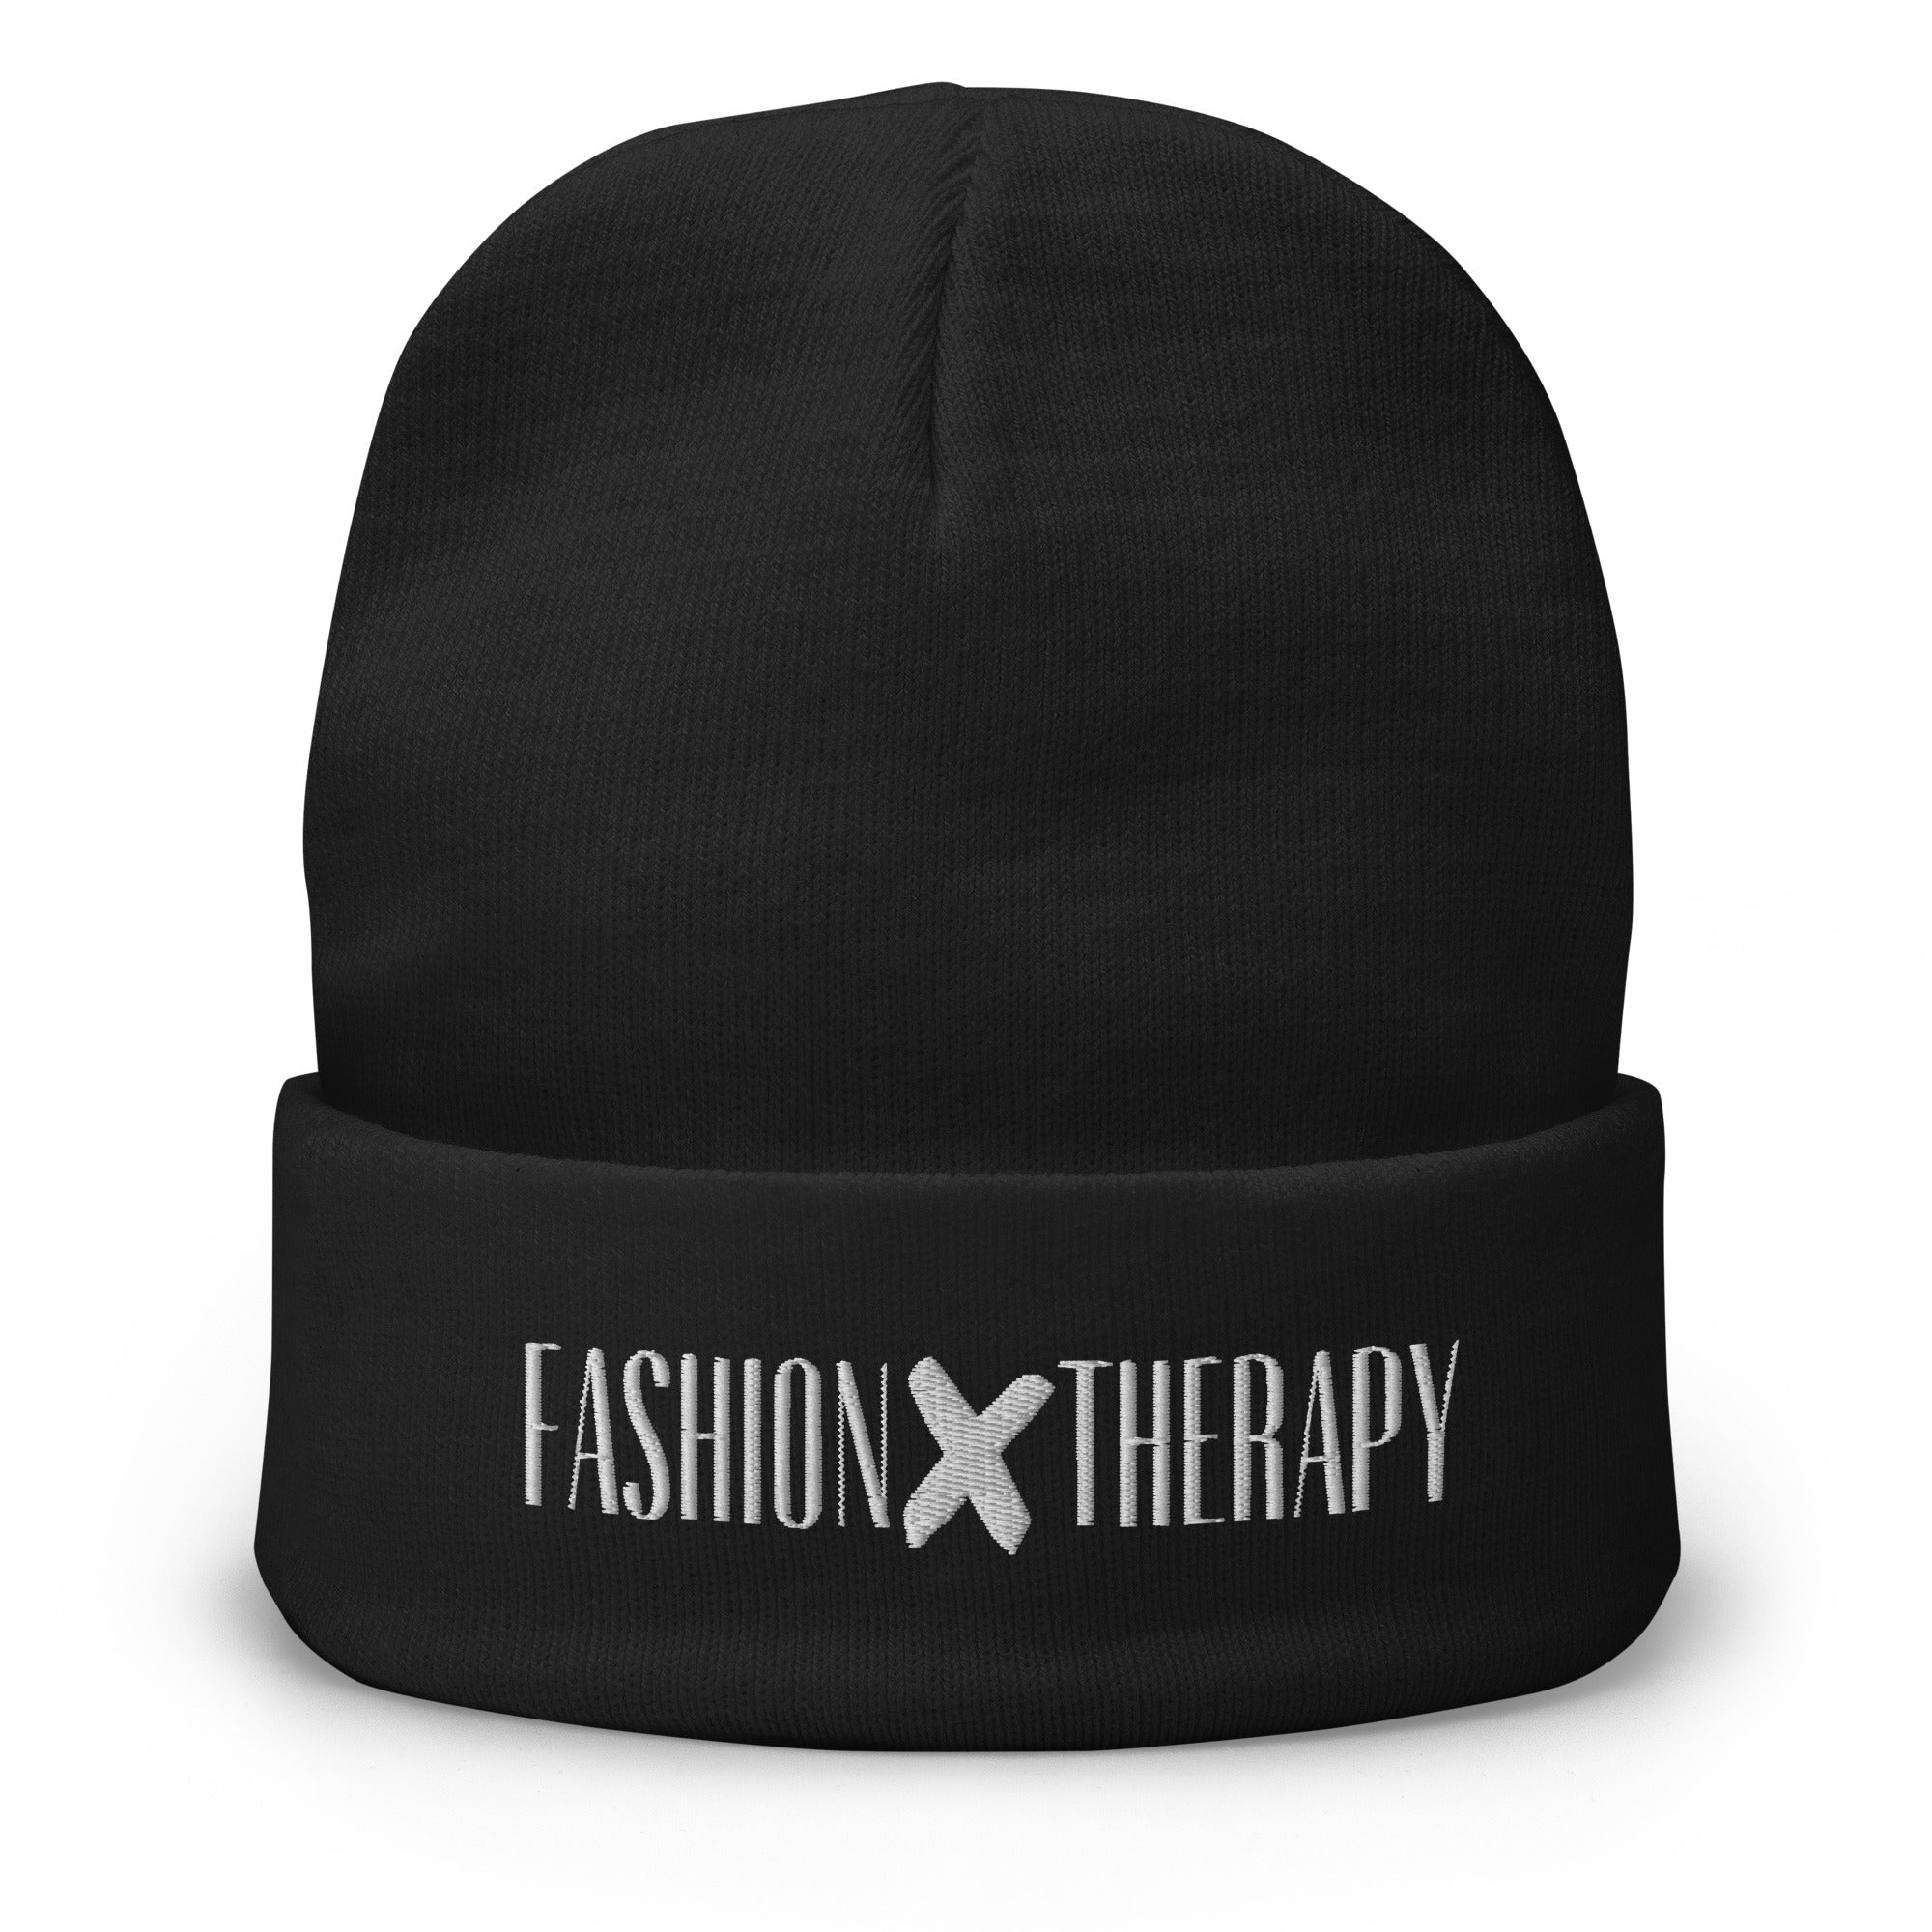 FASHION THERAPY embroidered hat